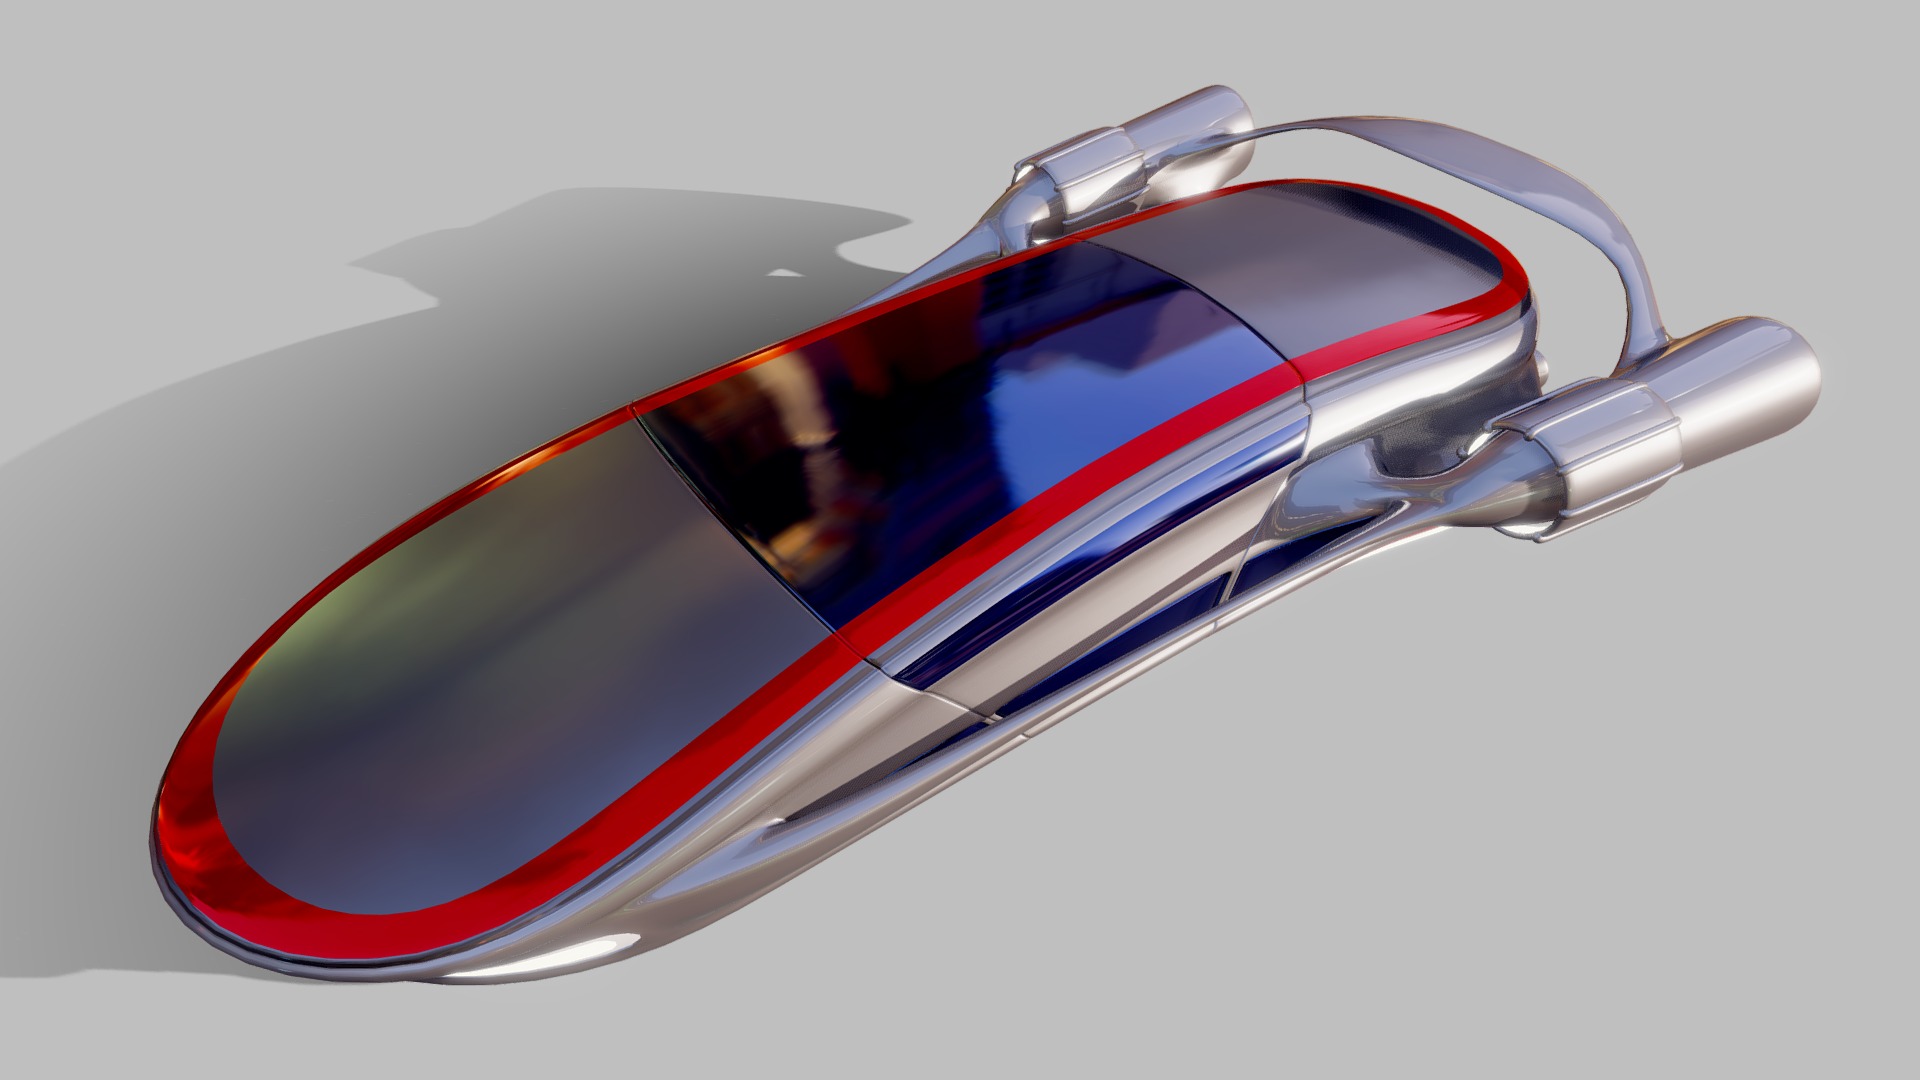 3D model Futuristic Car HD 12 - This is a 3D model of the Futuristic Car HD 12. The 3D model is about a red and white car.